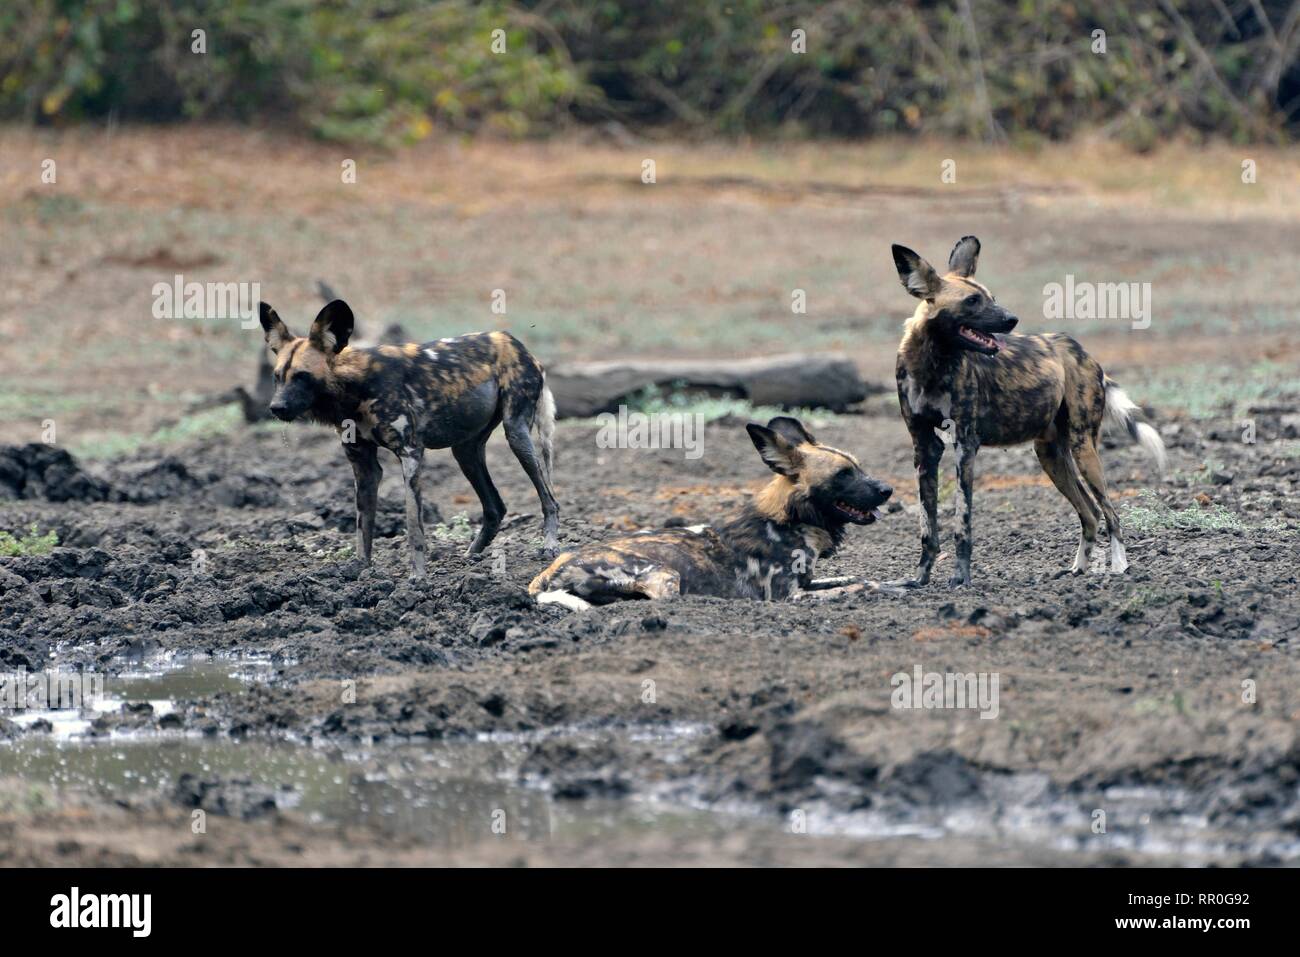 Zoologie, Säugetiere (Mammalia), Afrikanischer Wildhund (Lycaon pictus) an der Kanga waterplace, Manah Pools Nati, Additional-Rights - Clearance-Info - Not-Available Stockfoto